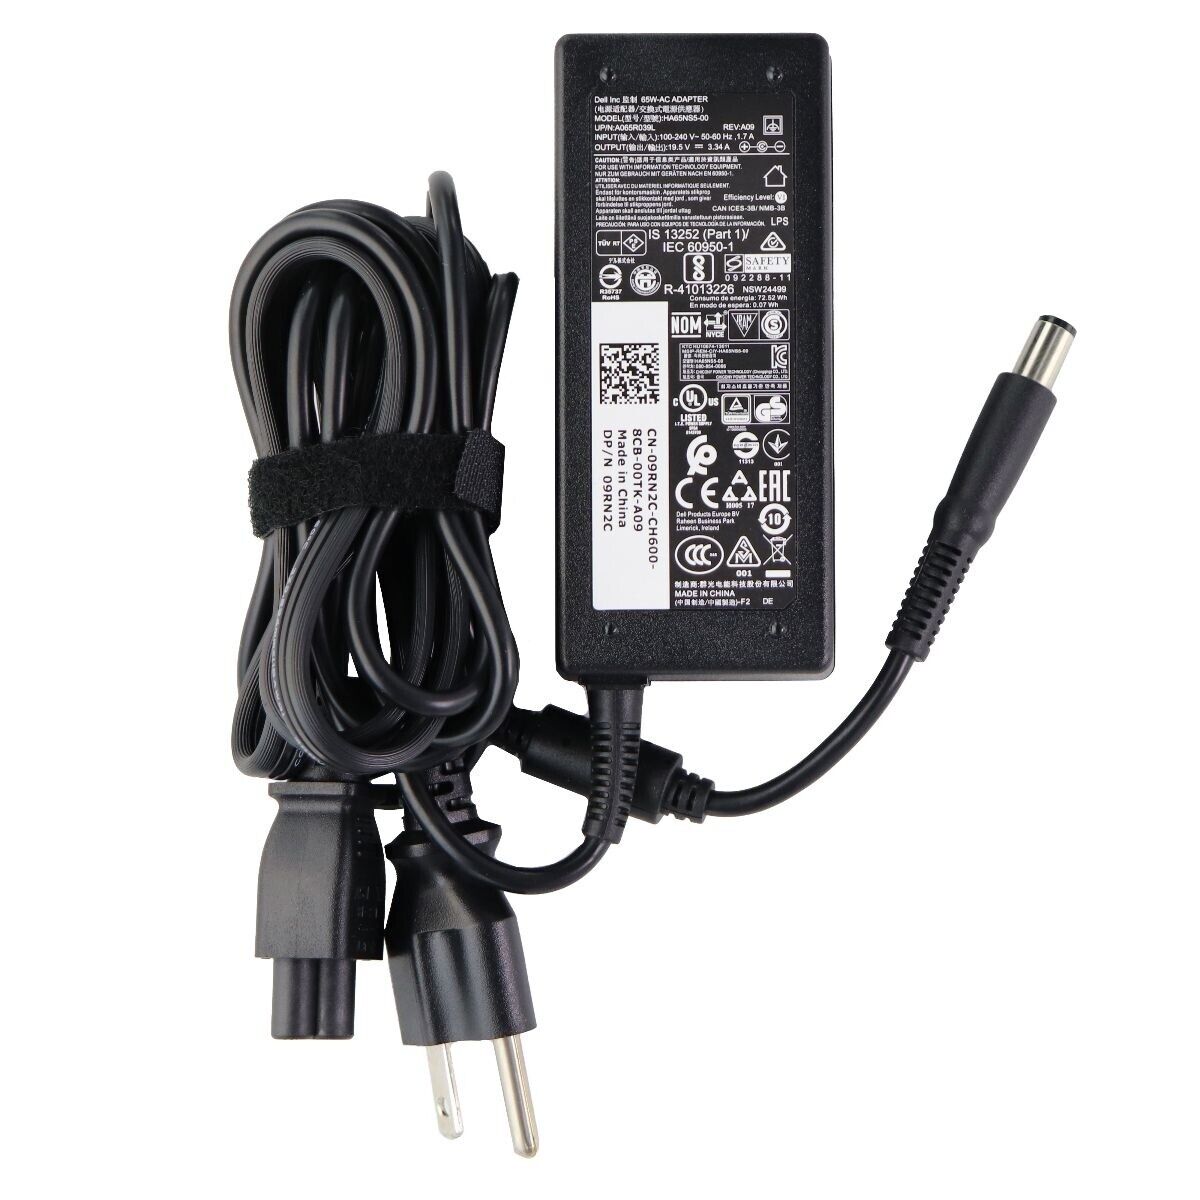 65W AC Adapter OEM Power Supply for Dell- Black (HA65NS5-00) (7.4mm Connector)